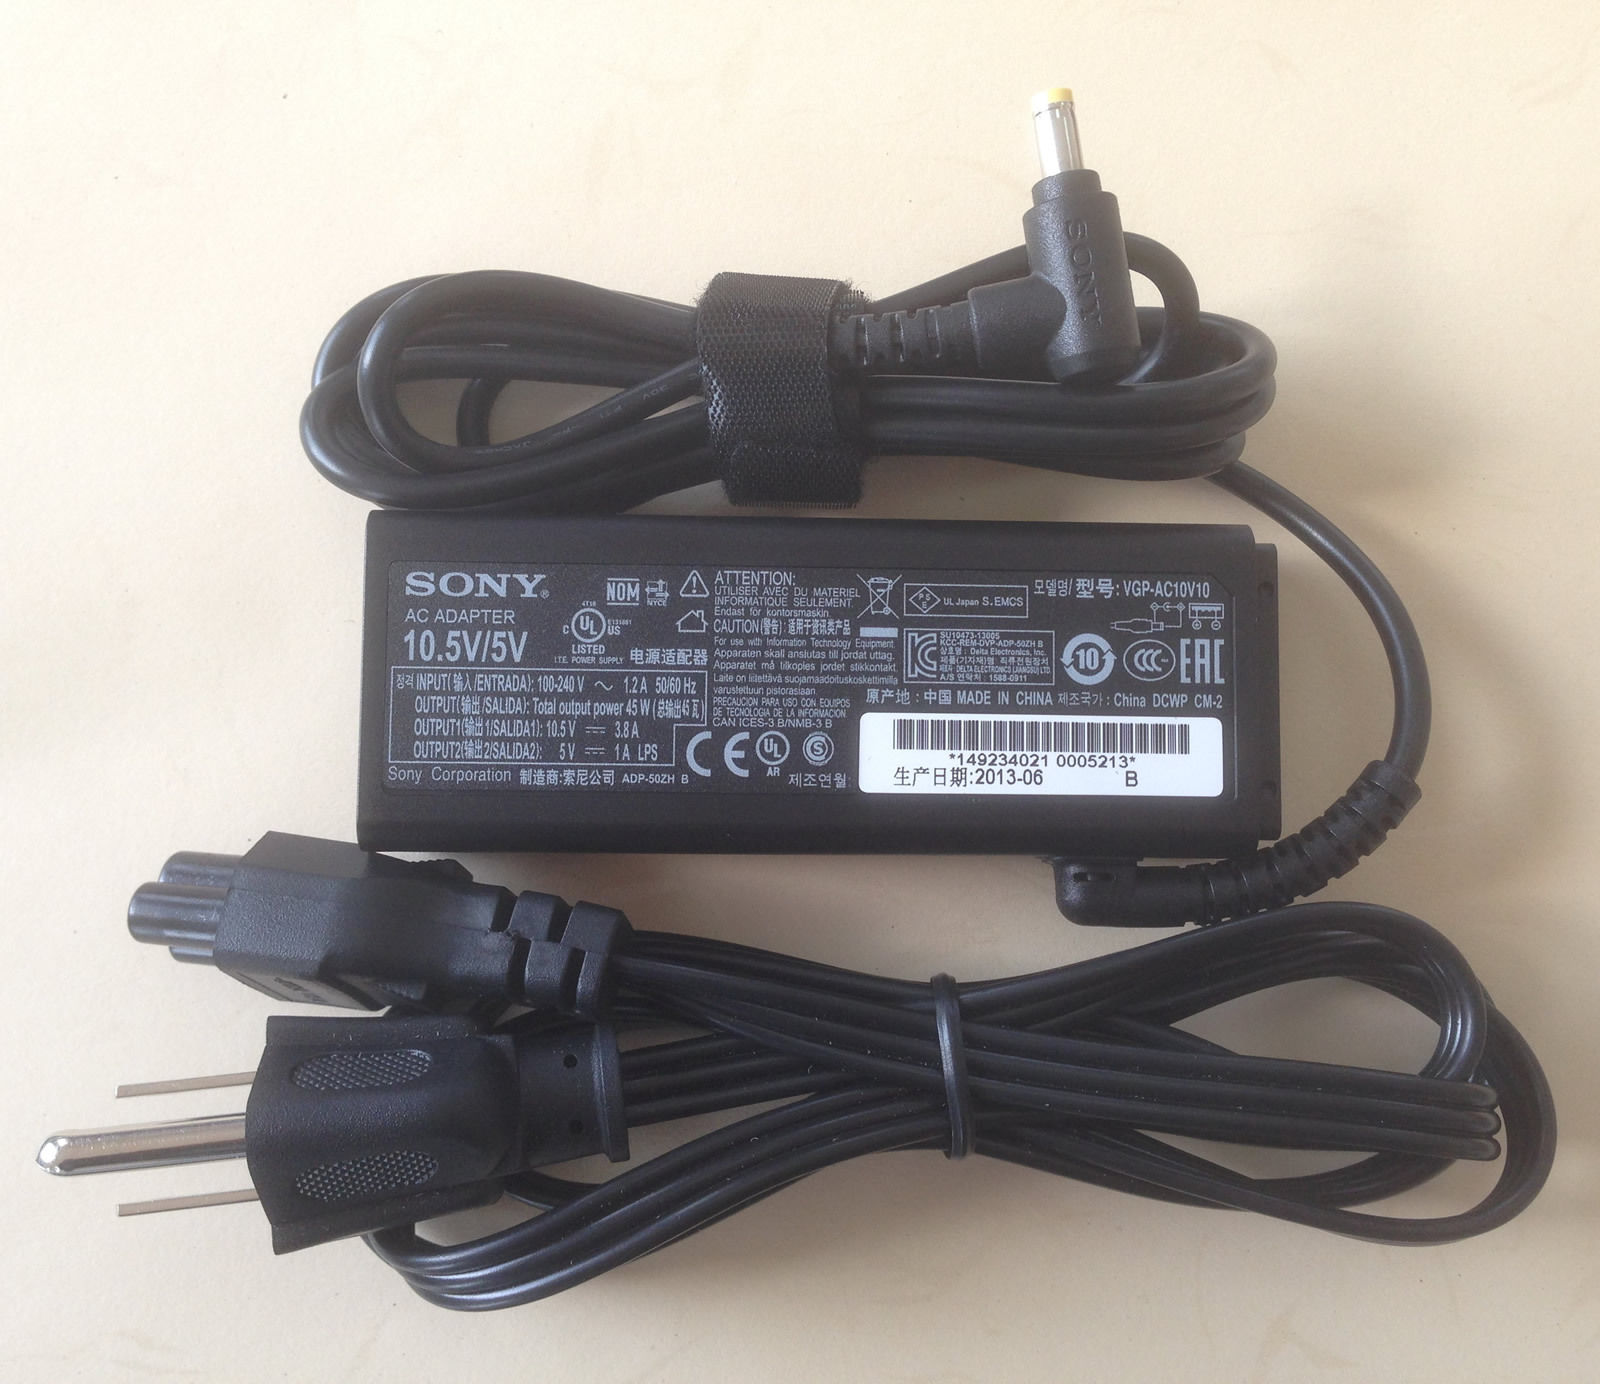 Sony VGP-AC10V10 Charger VAIO Pro 13 SVP13216PGB Touch Ultrabook